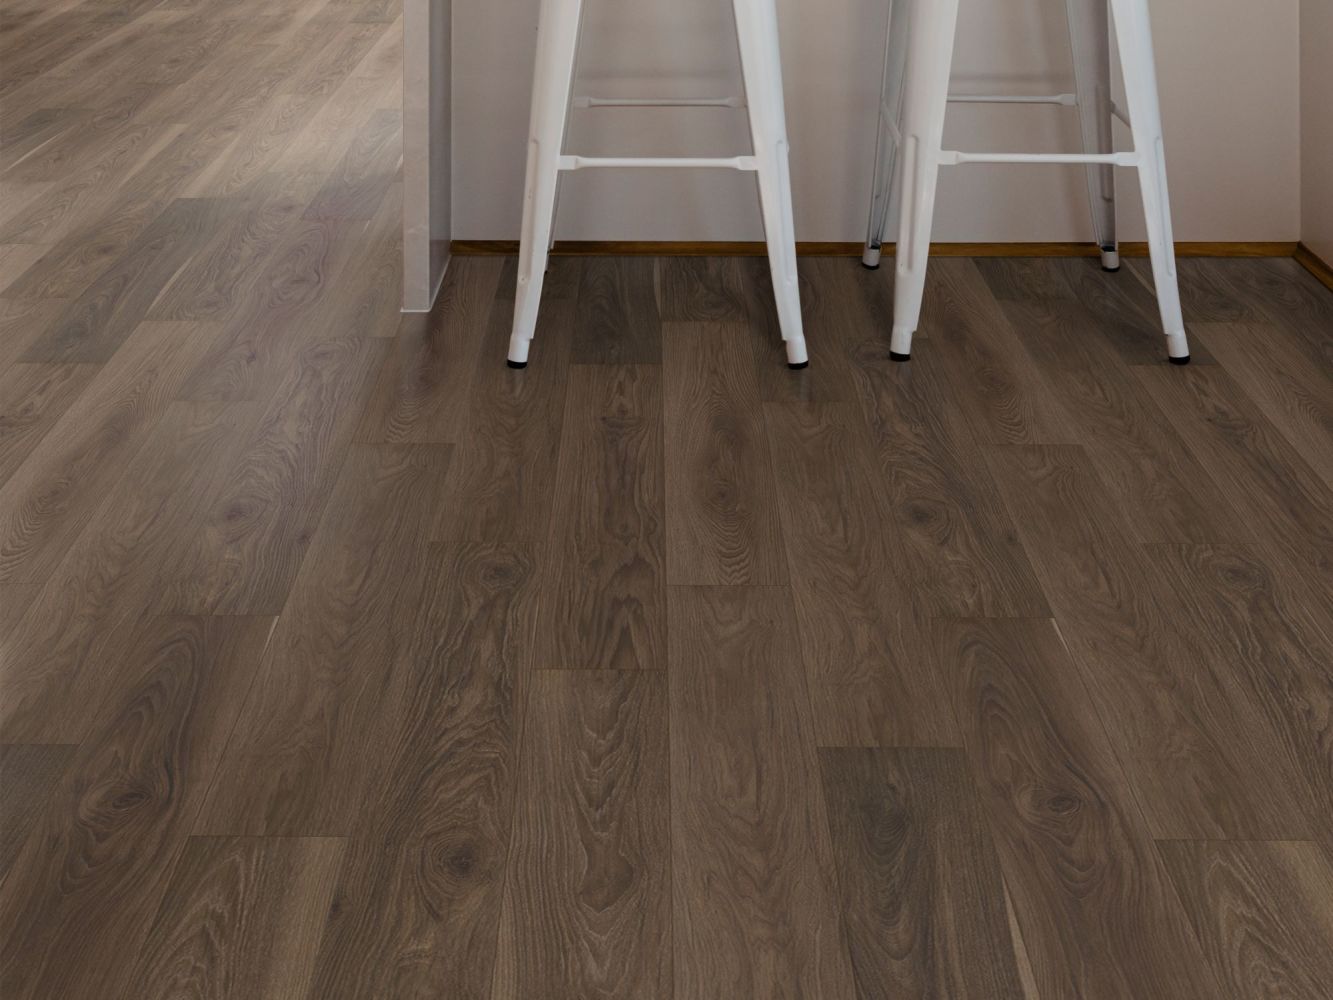 Shaw Floors Resilient Residential Pantheon Hd+ Natural Bevel Charred Earth 07232_1051V